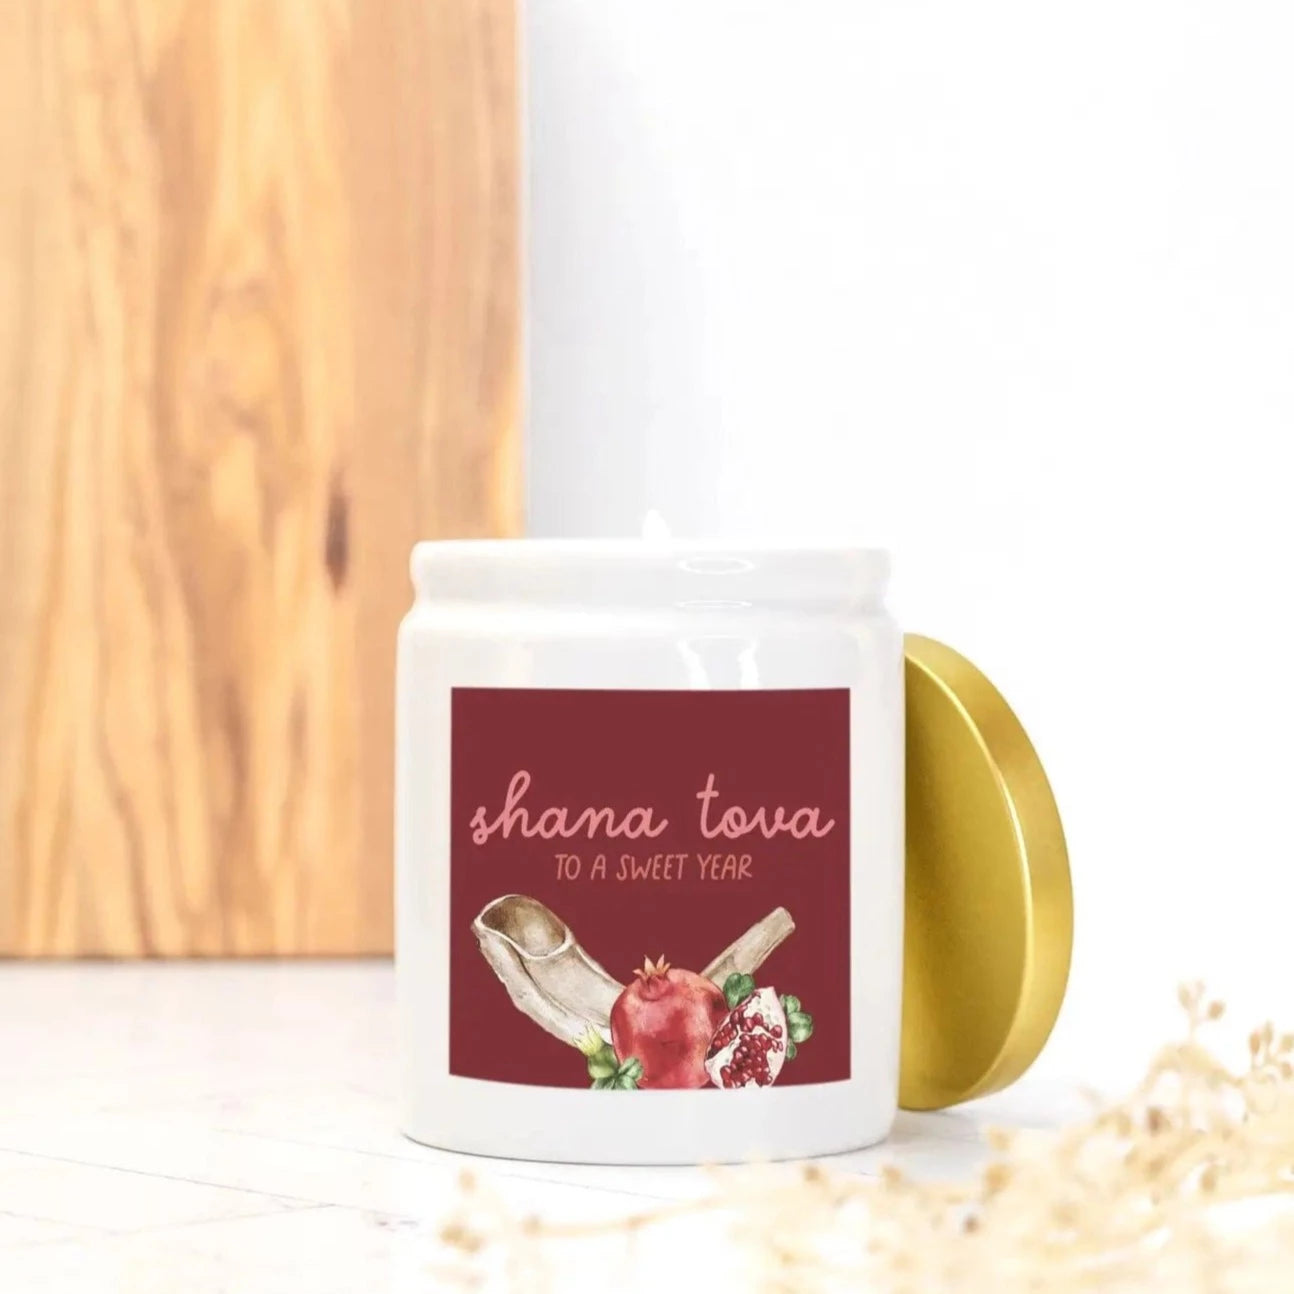 Love Always, Audrey Candles Rosh Hashanah Ceramic Candle - Apple Orchard Scent